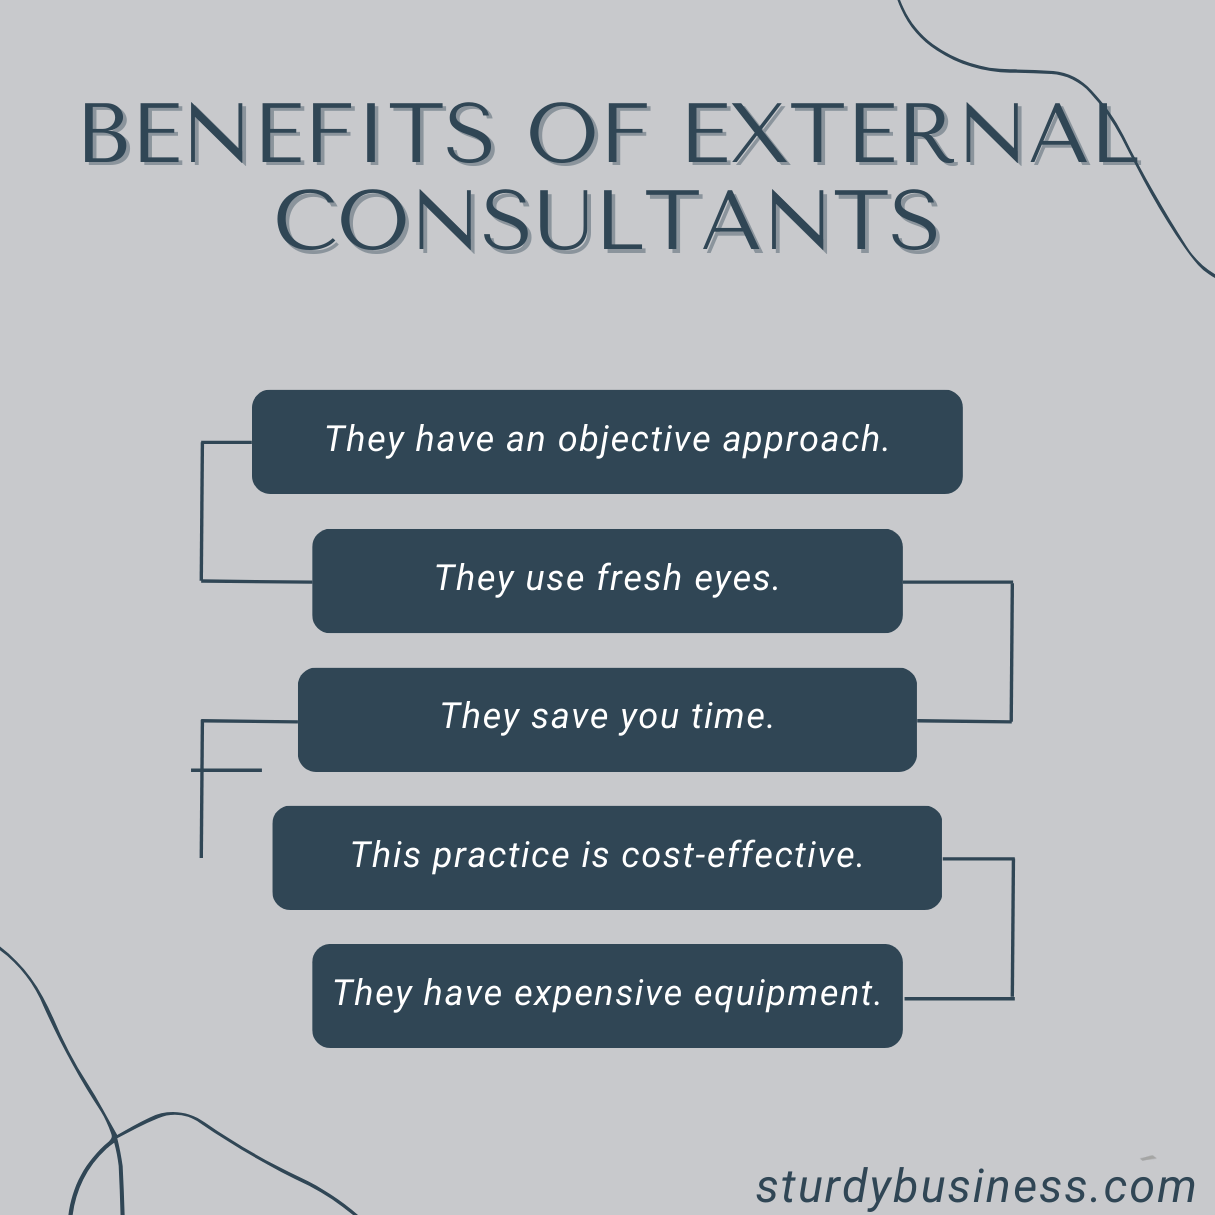 Top benefits of using external consultants for business